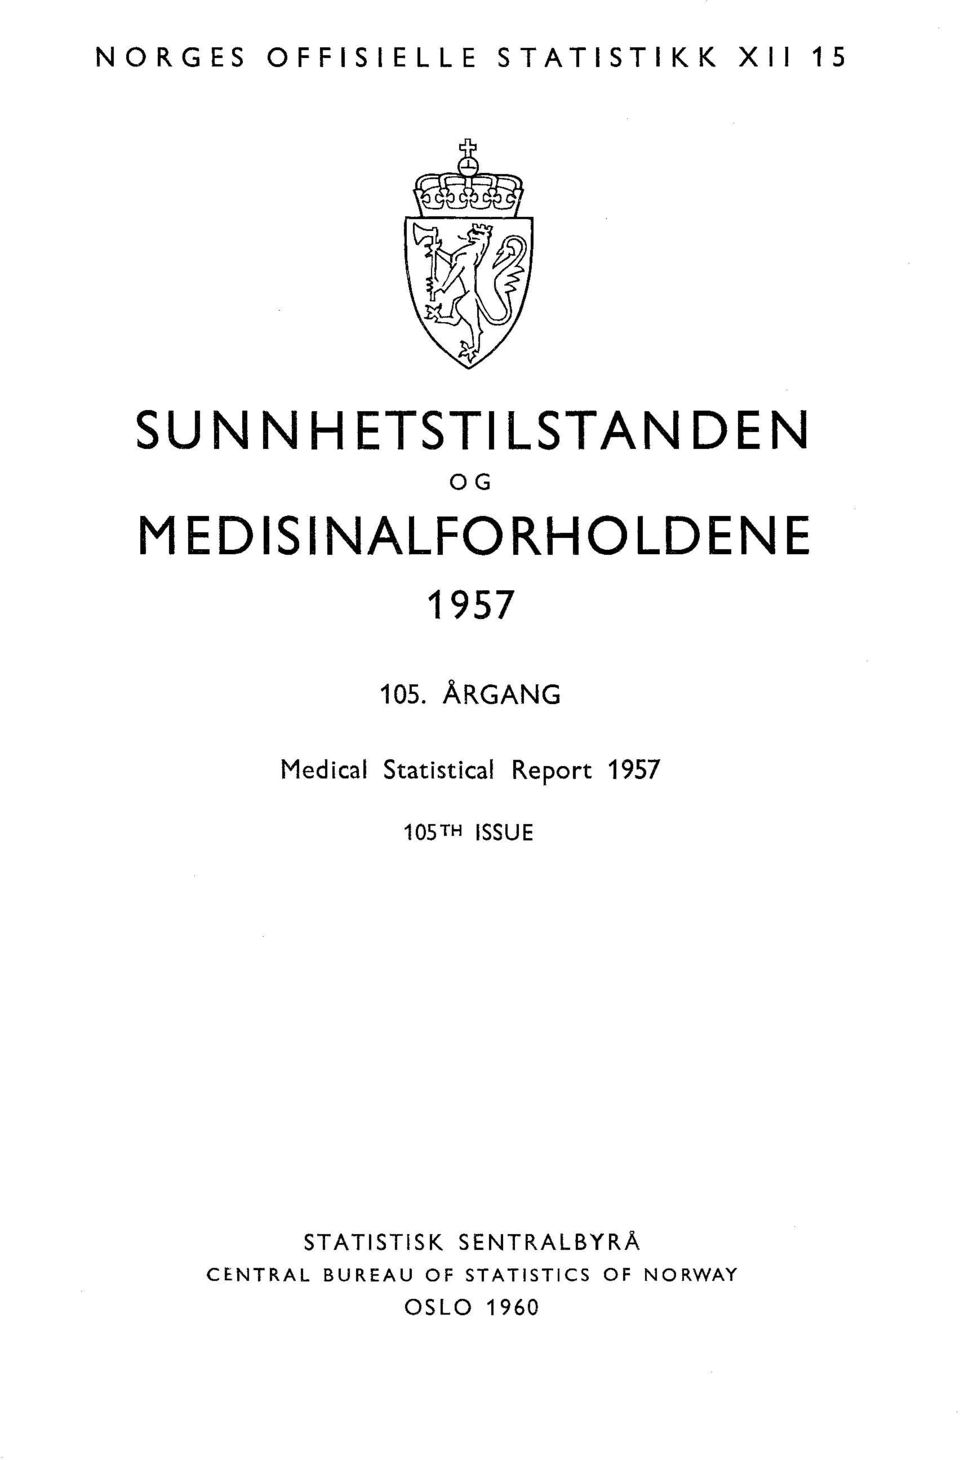 ÅRGANG Medical Statistical Report 957 05TH ISSUE